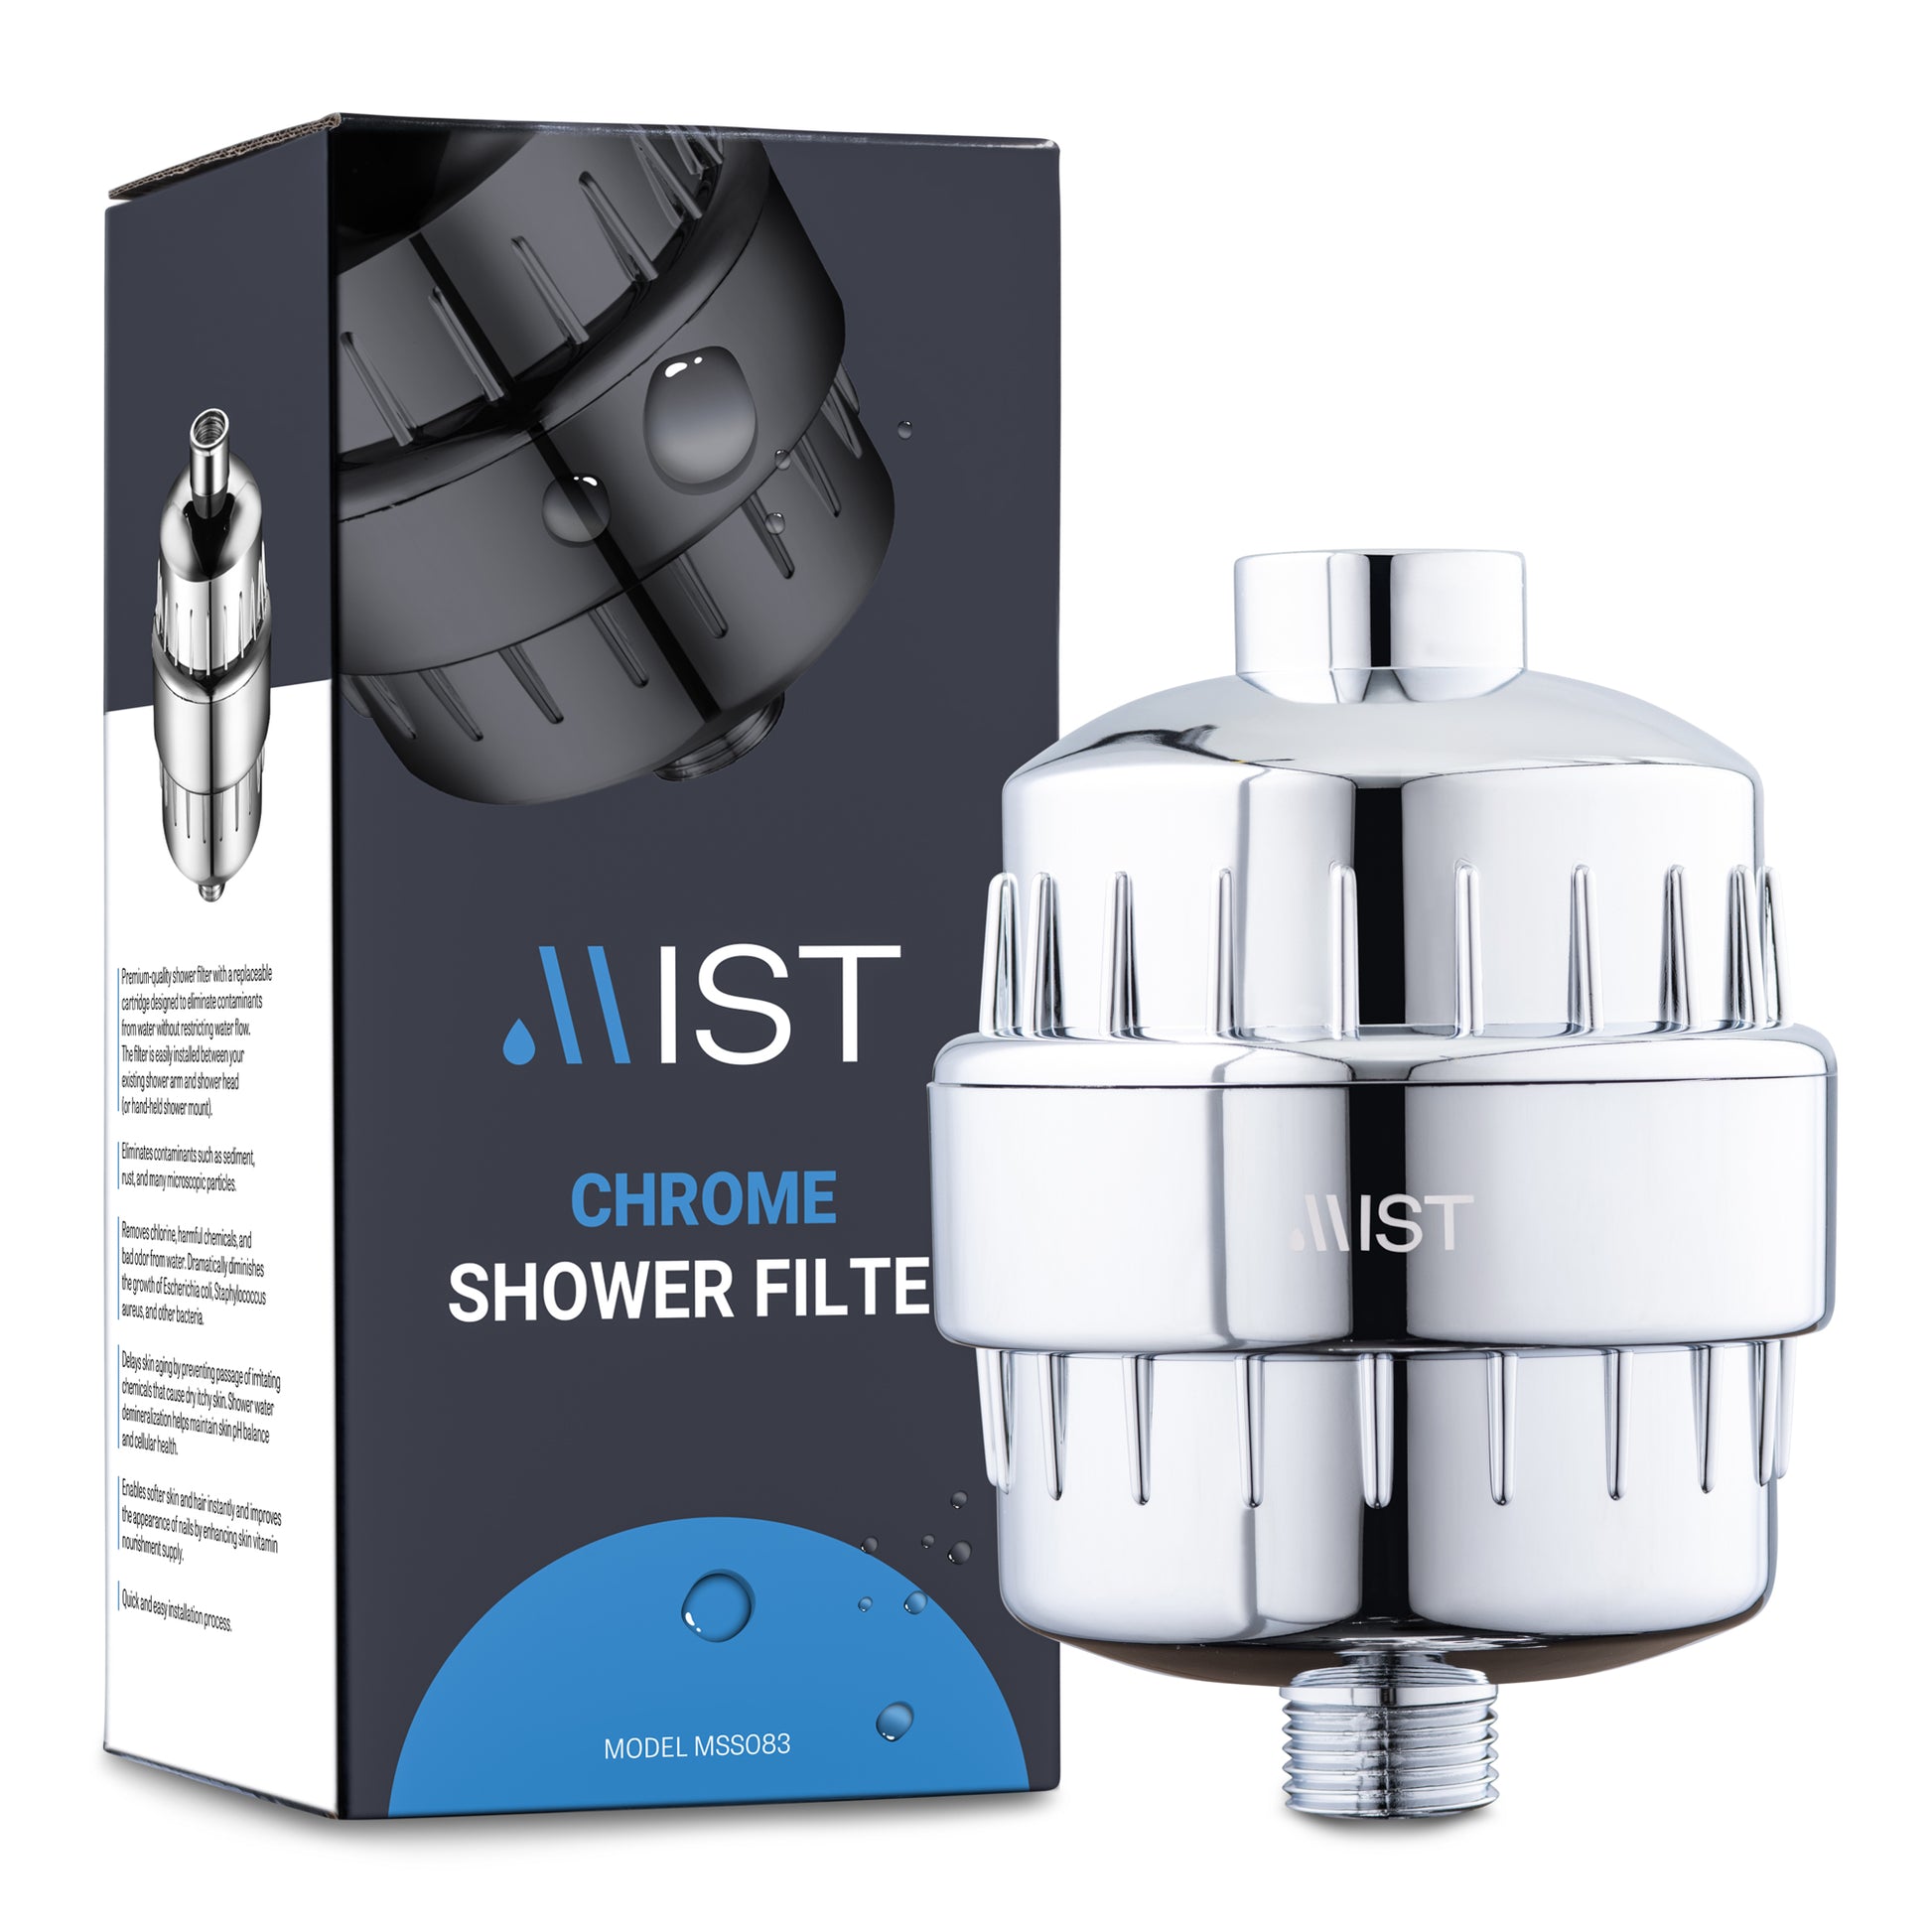 15 Stage Shower Filter - Water Softener Shower Head Filter With 2  Replaceable Multi-stage Filter Cartridges To Remove Chlorine, Heavy Metal